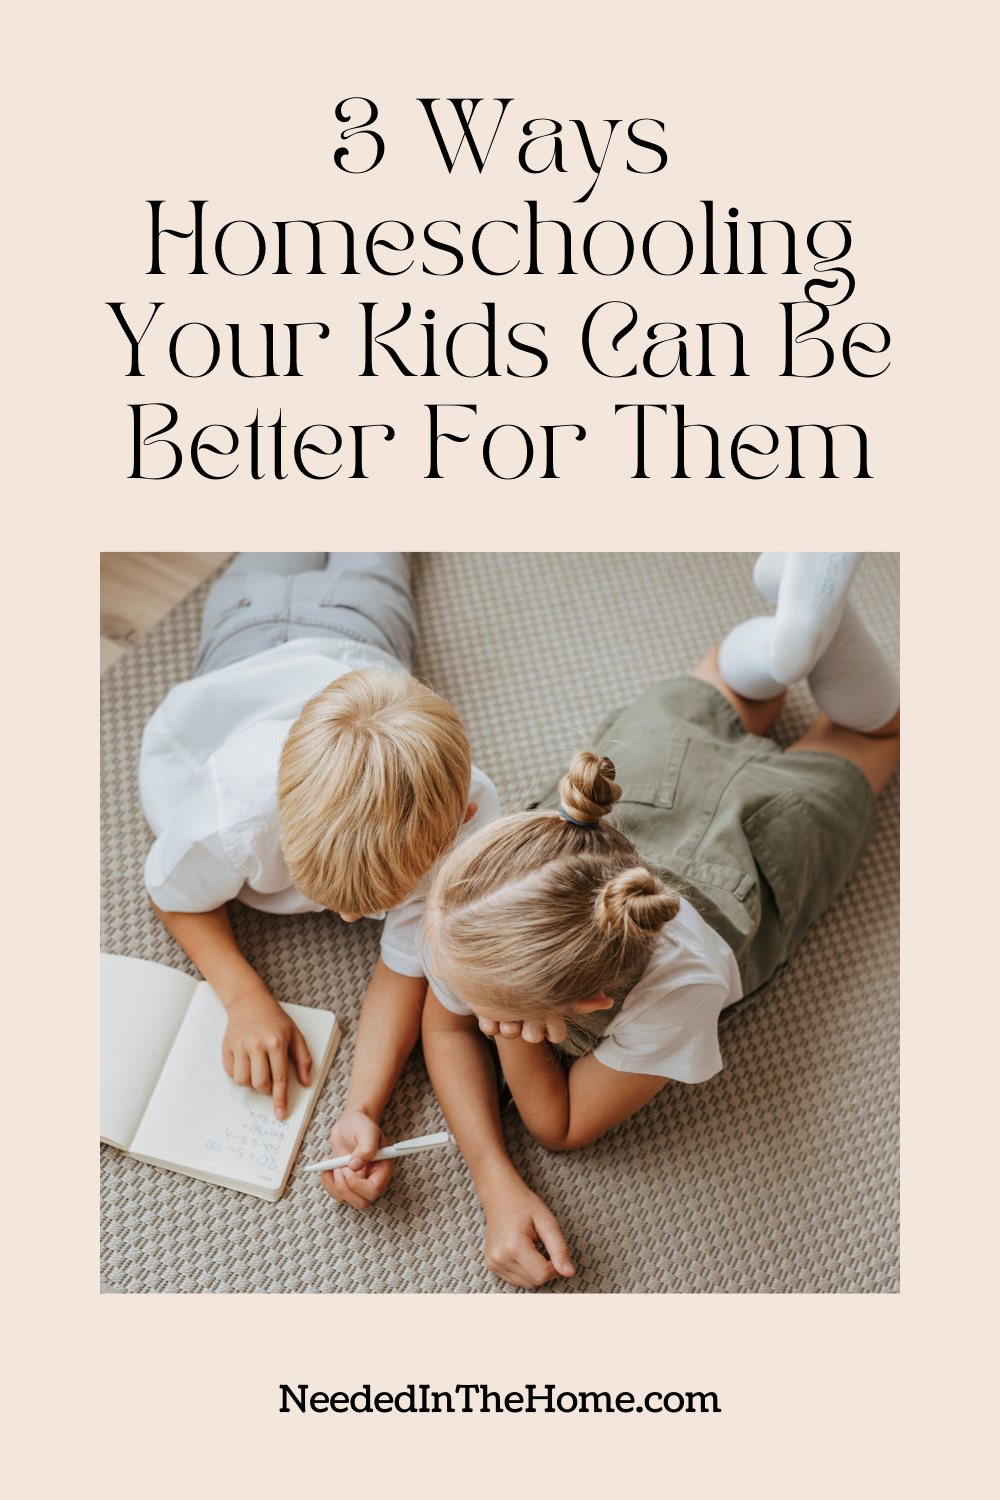 pinterest-pin-description 3 ways homeschooling your kids can be better for them neededinthehome